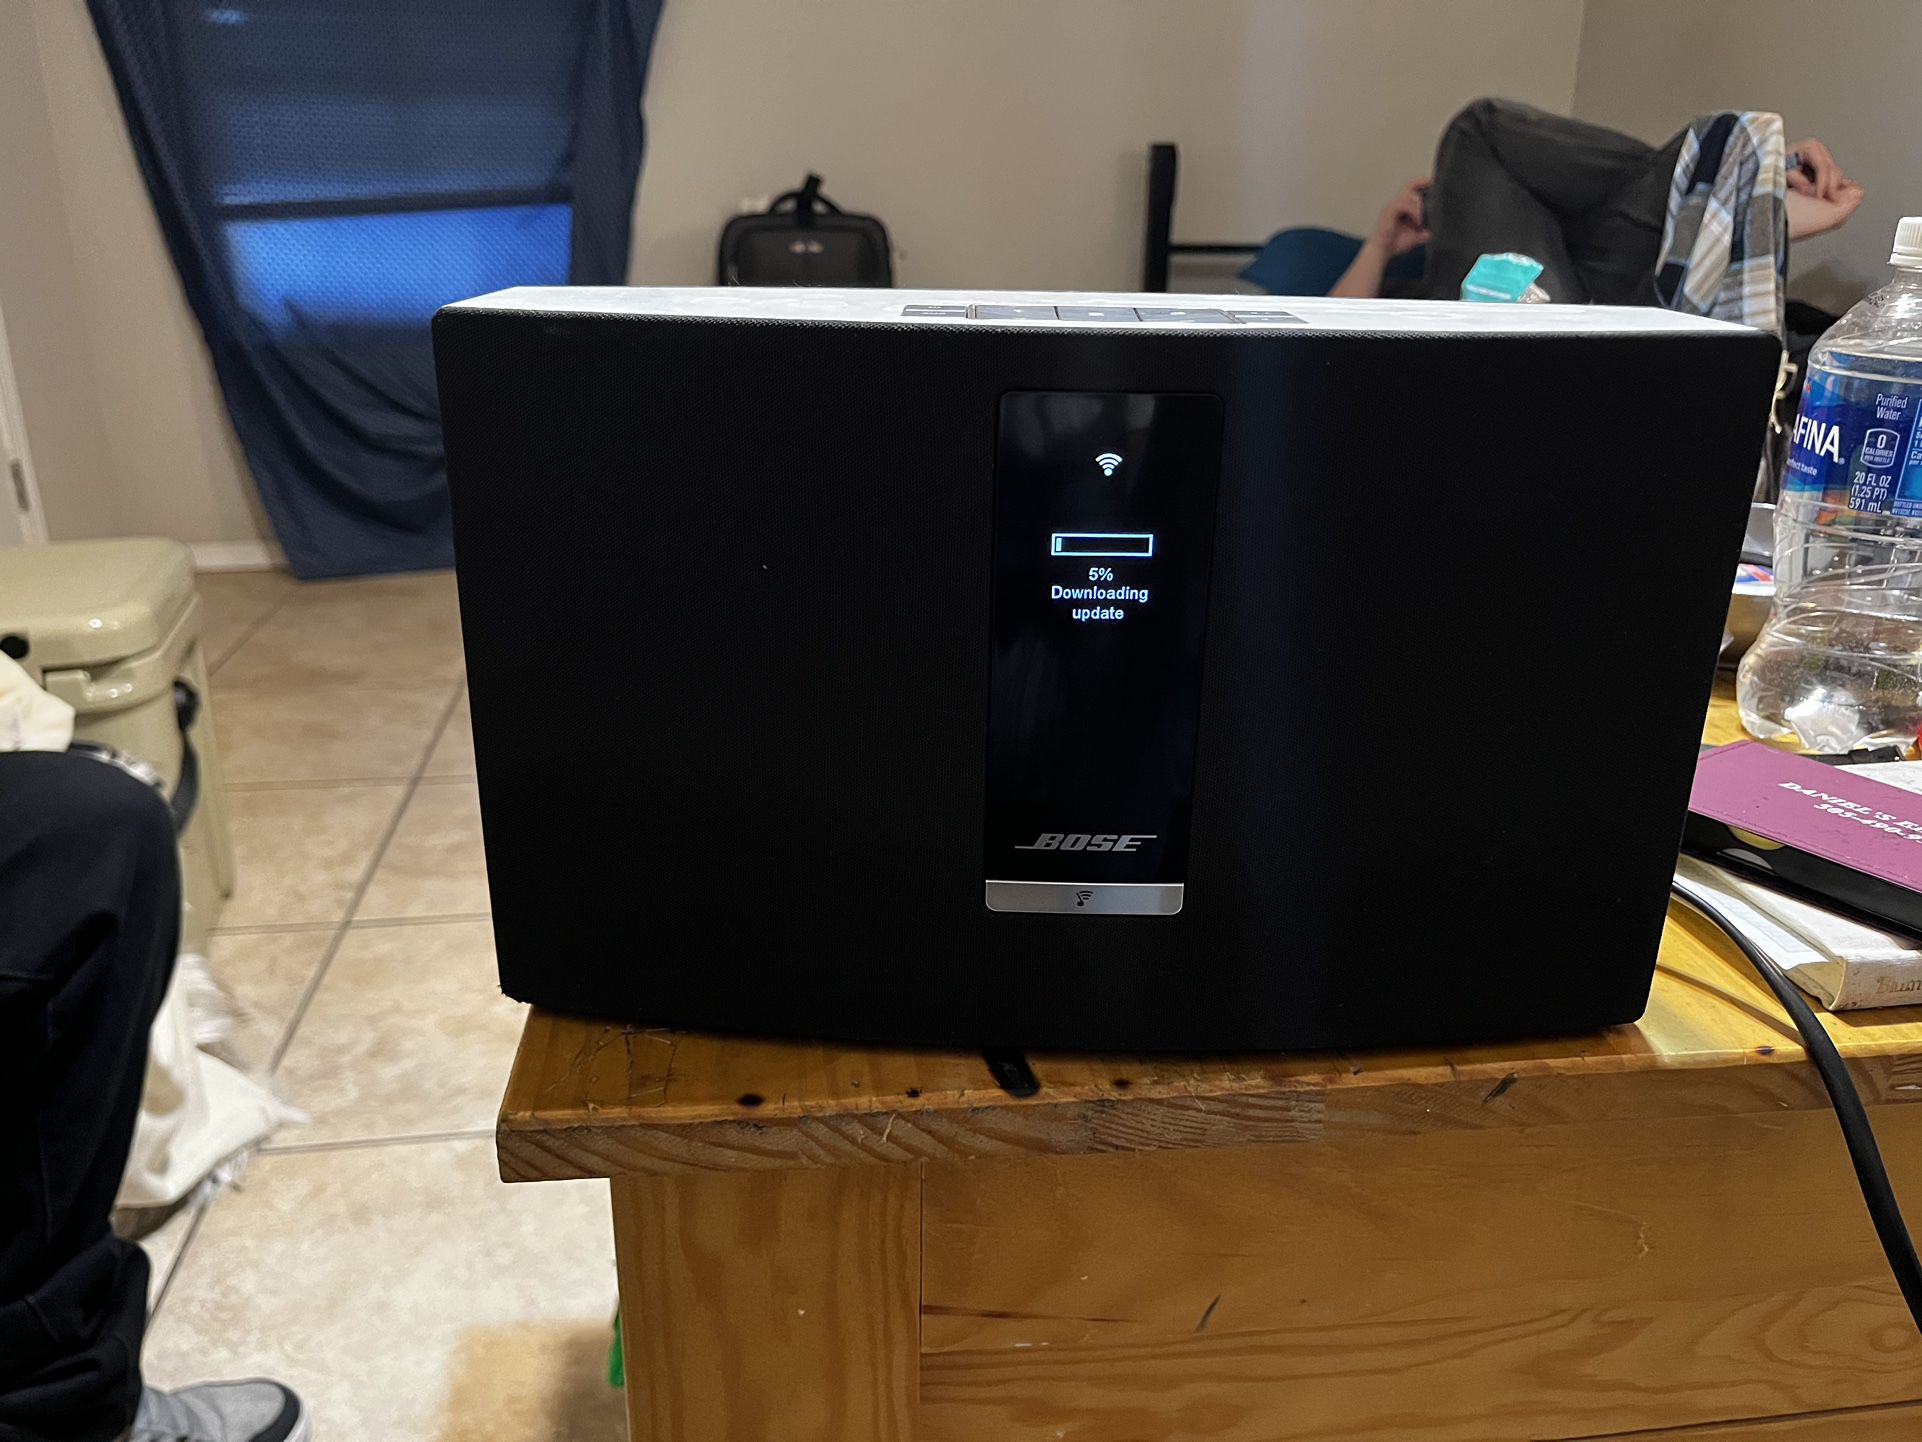 Bose SoundTouch 20 WiFi music System 